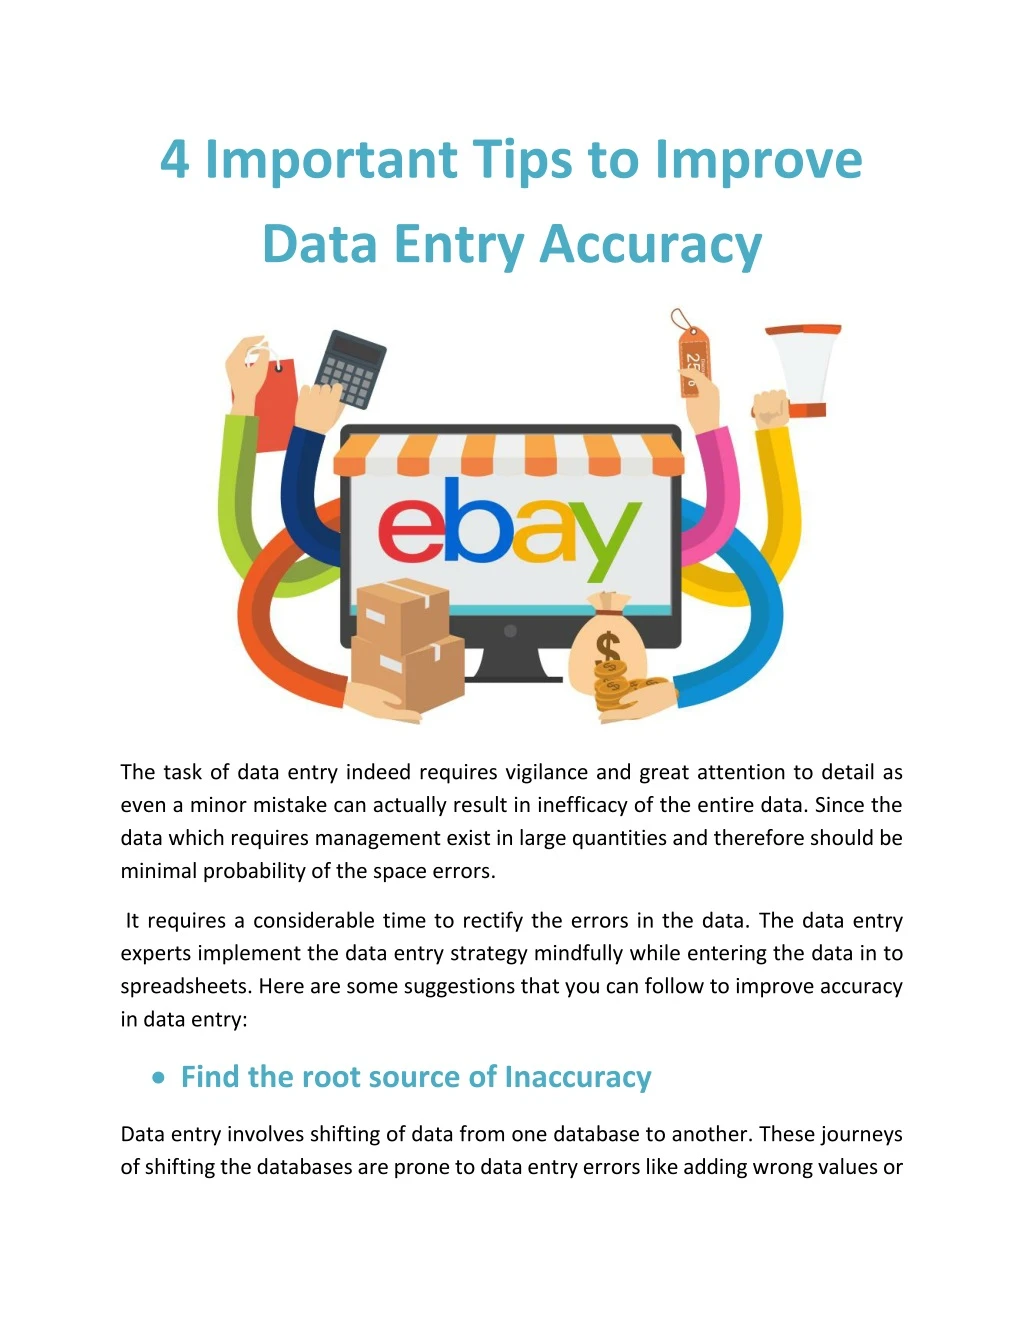 4 important tips to improve data entry accuracy